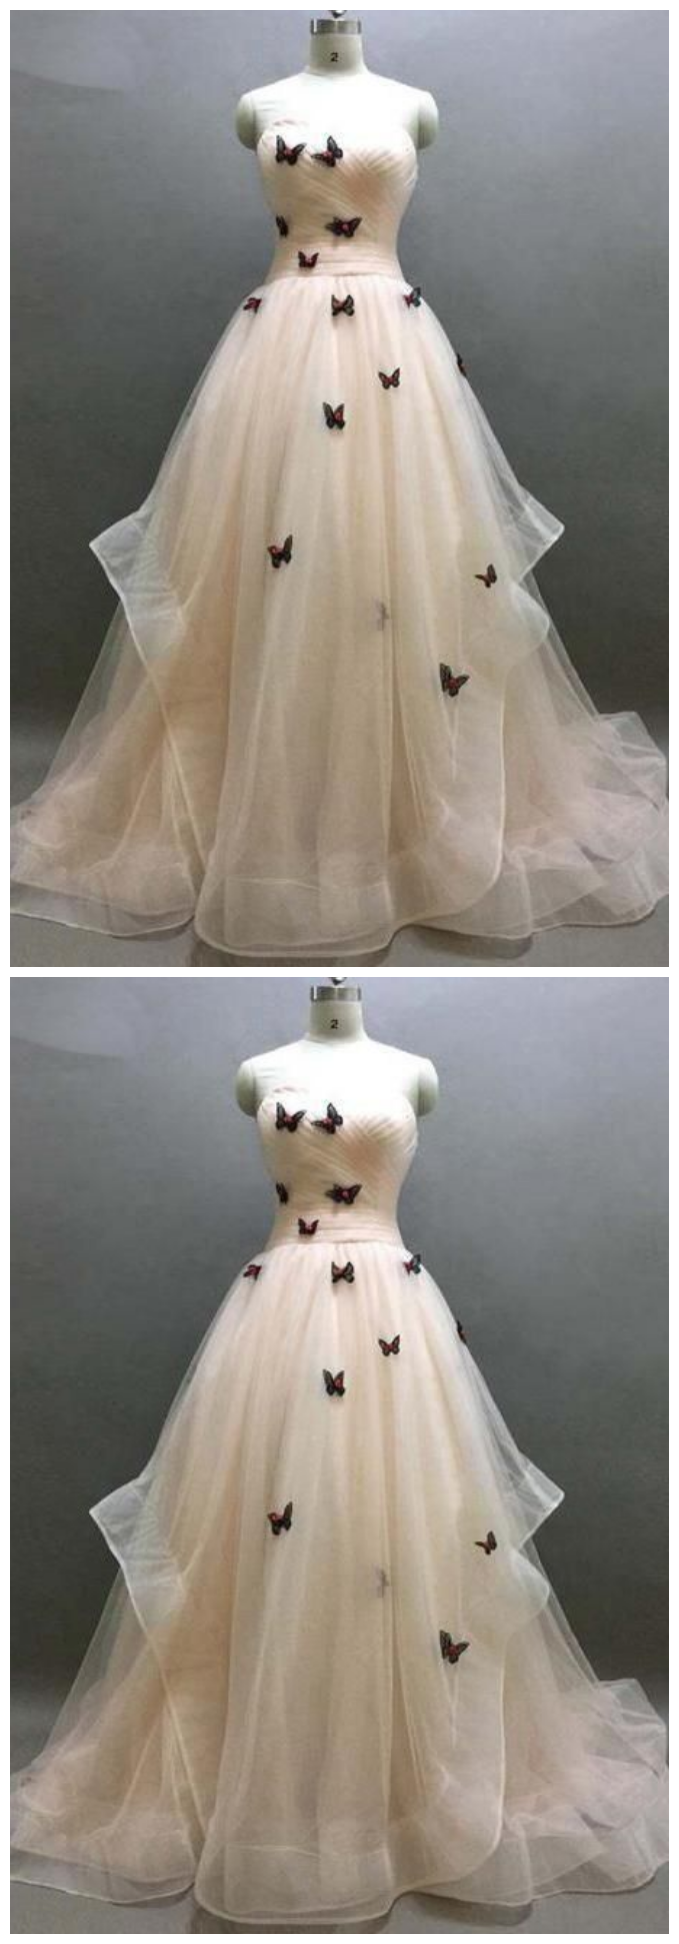 Sweetheart Ruffle Prom Dress, Beautiful Butterfly Appliques Lace Up Prom Dress, Prom Dresses